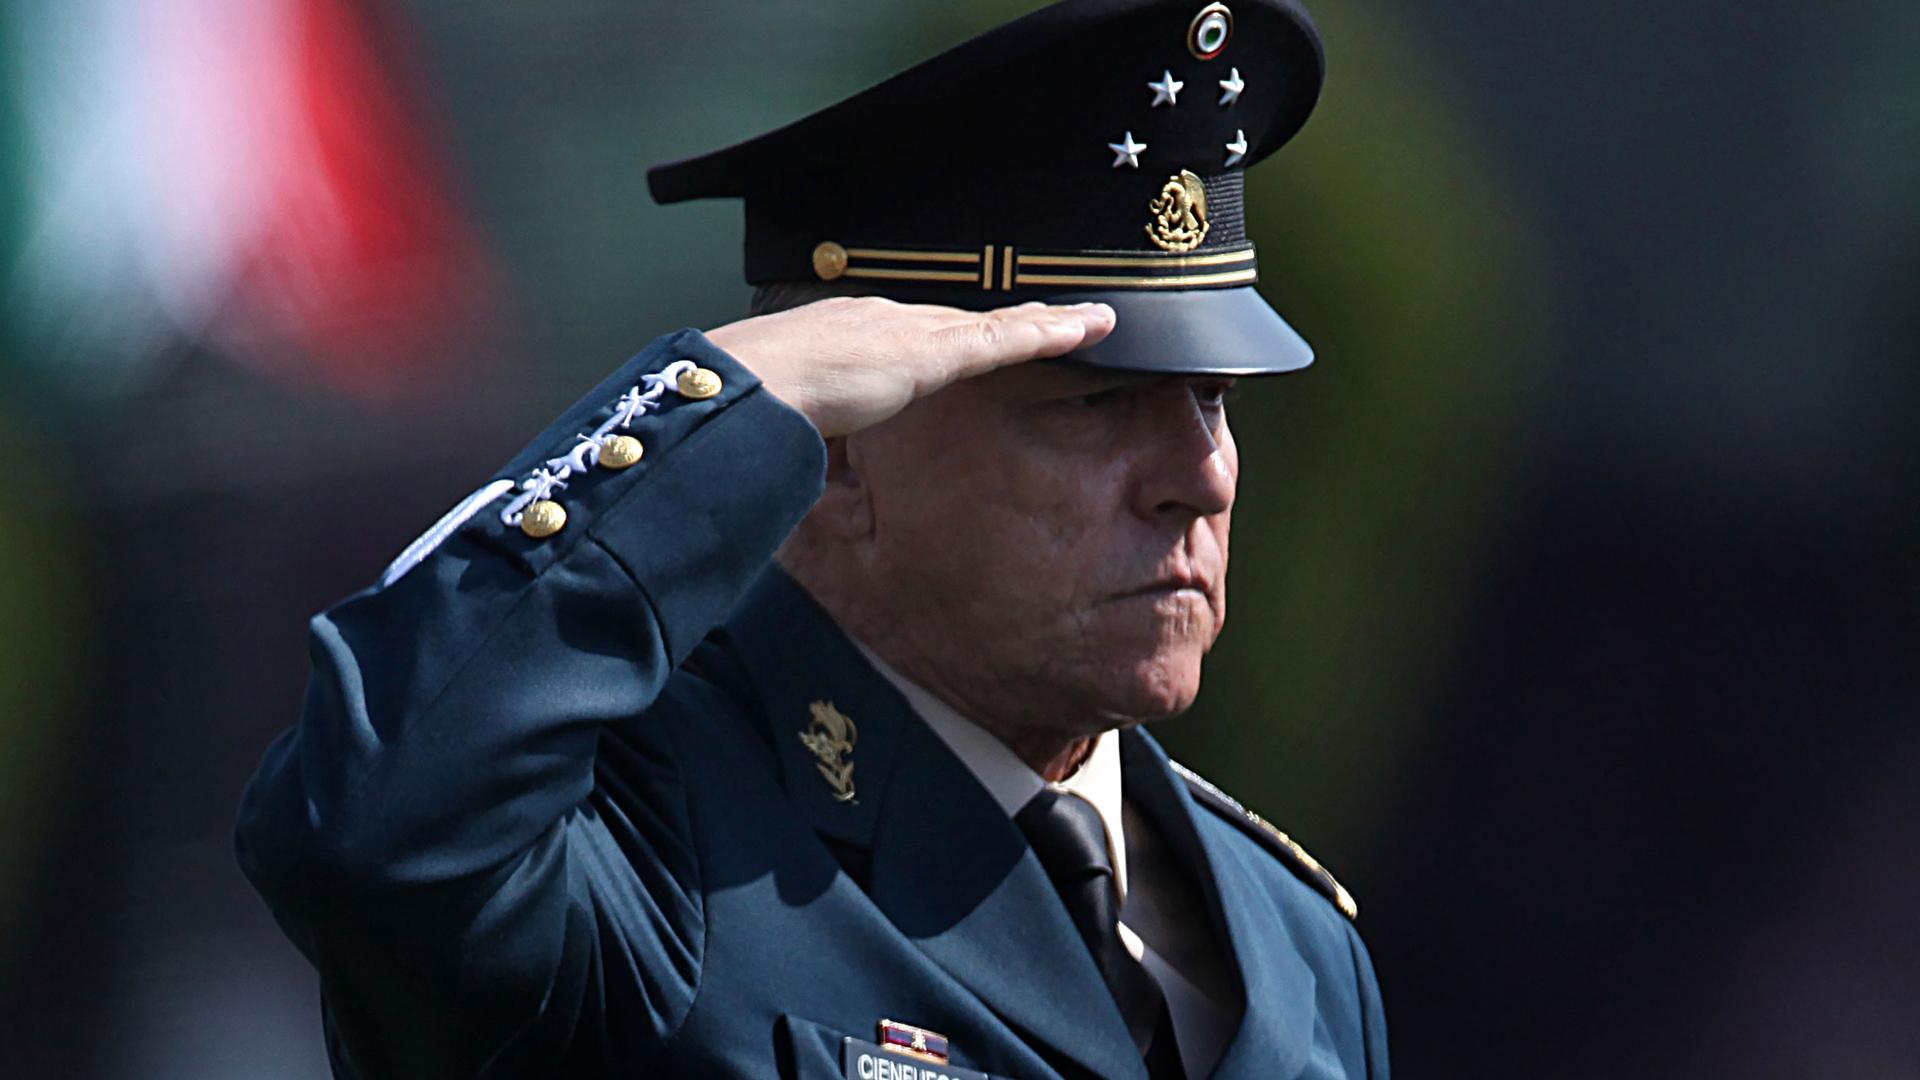 Mexico's Defense Secretary Gen. Salvador Cienfuegos Zepeda is shown wearing his military uniform and billed hat while holding his right hand up to salute.